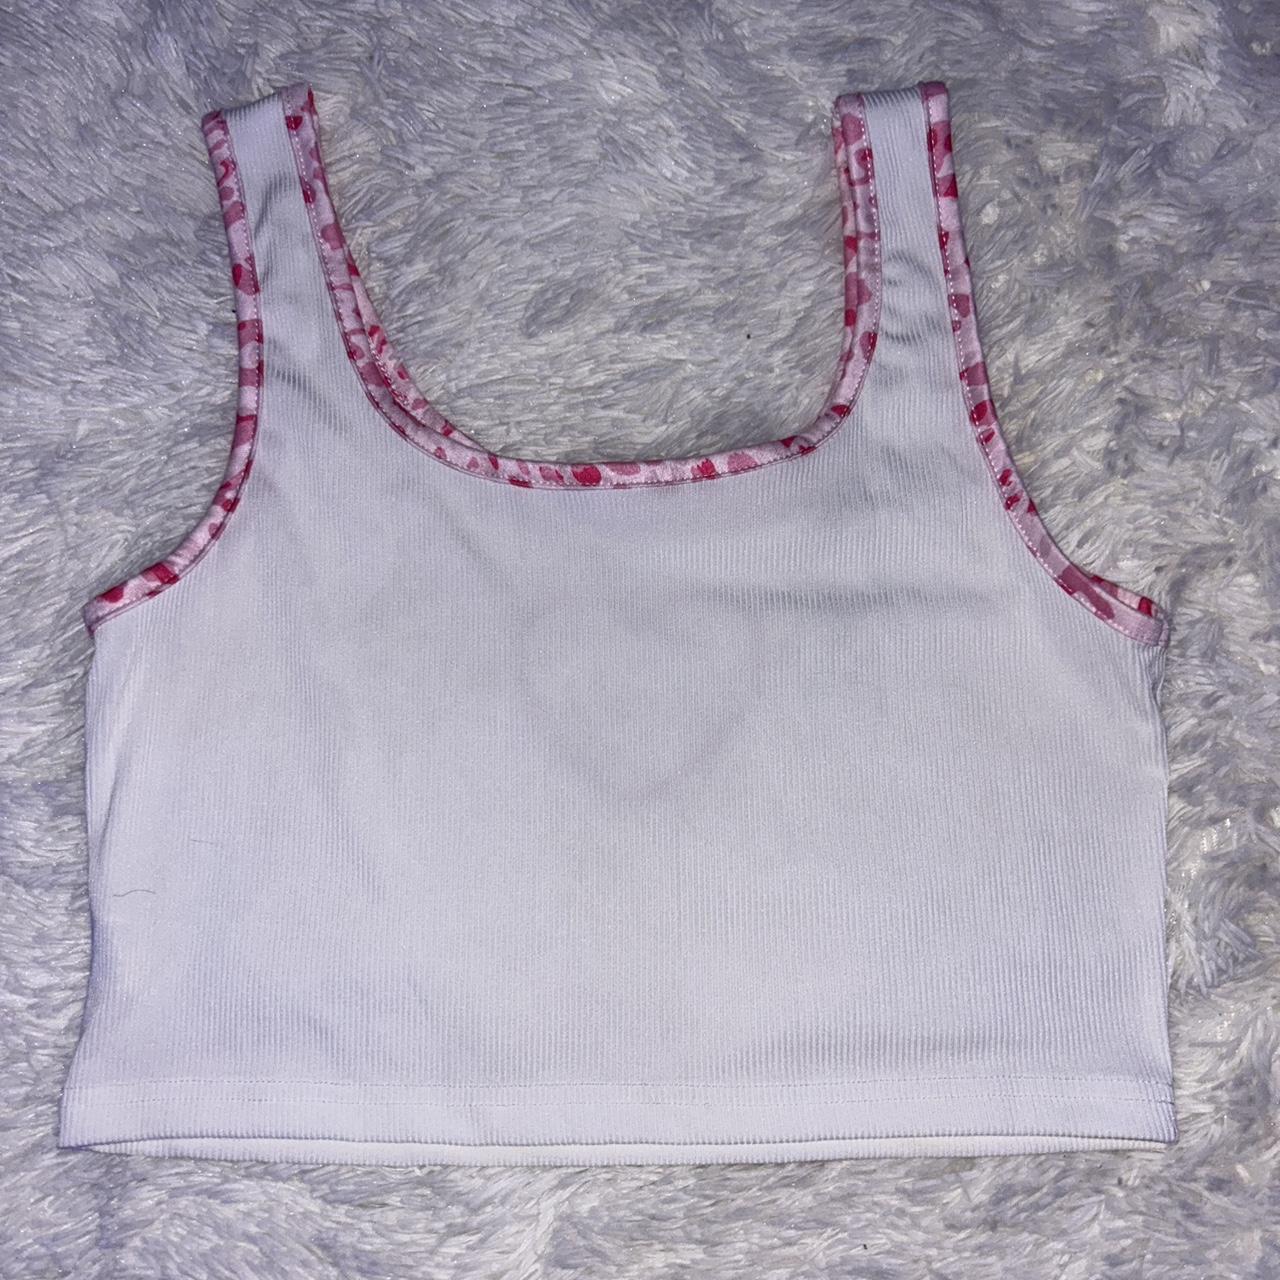 Romwe Women's Pink and White Crop-top (2)